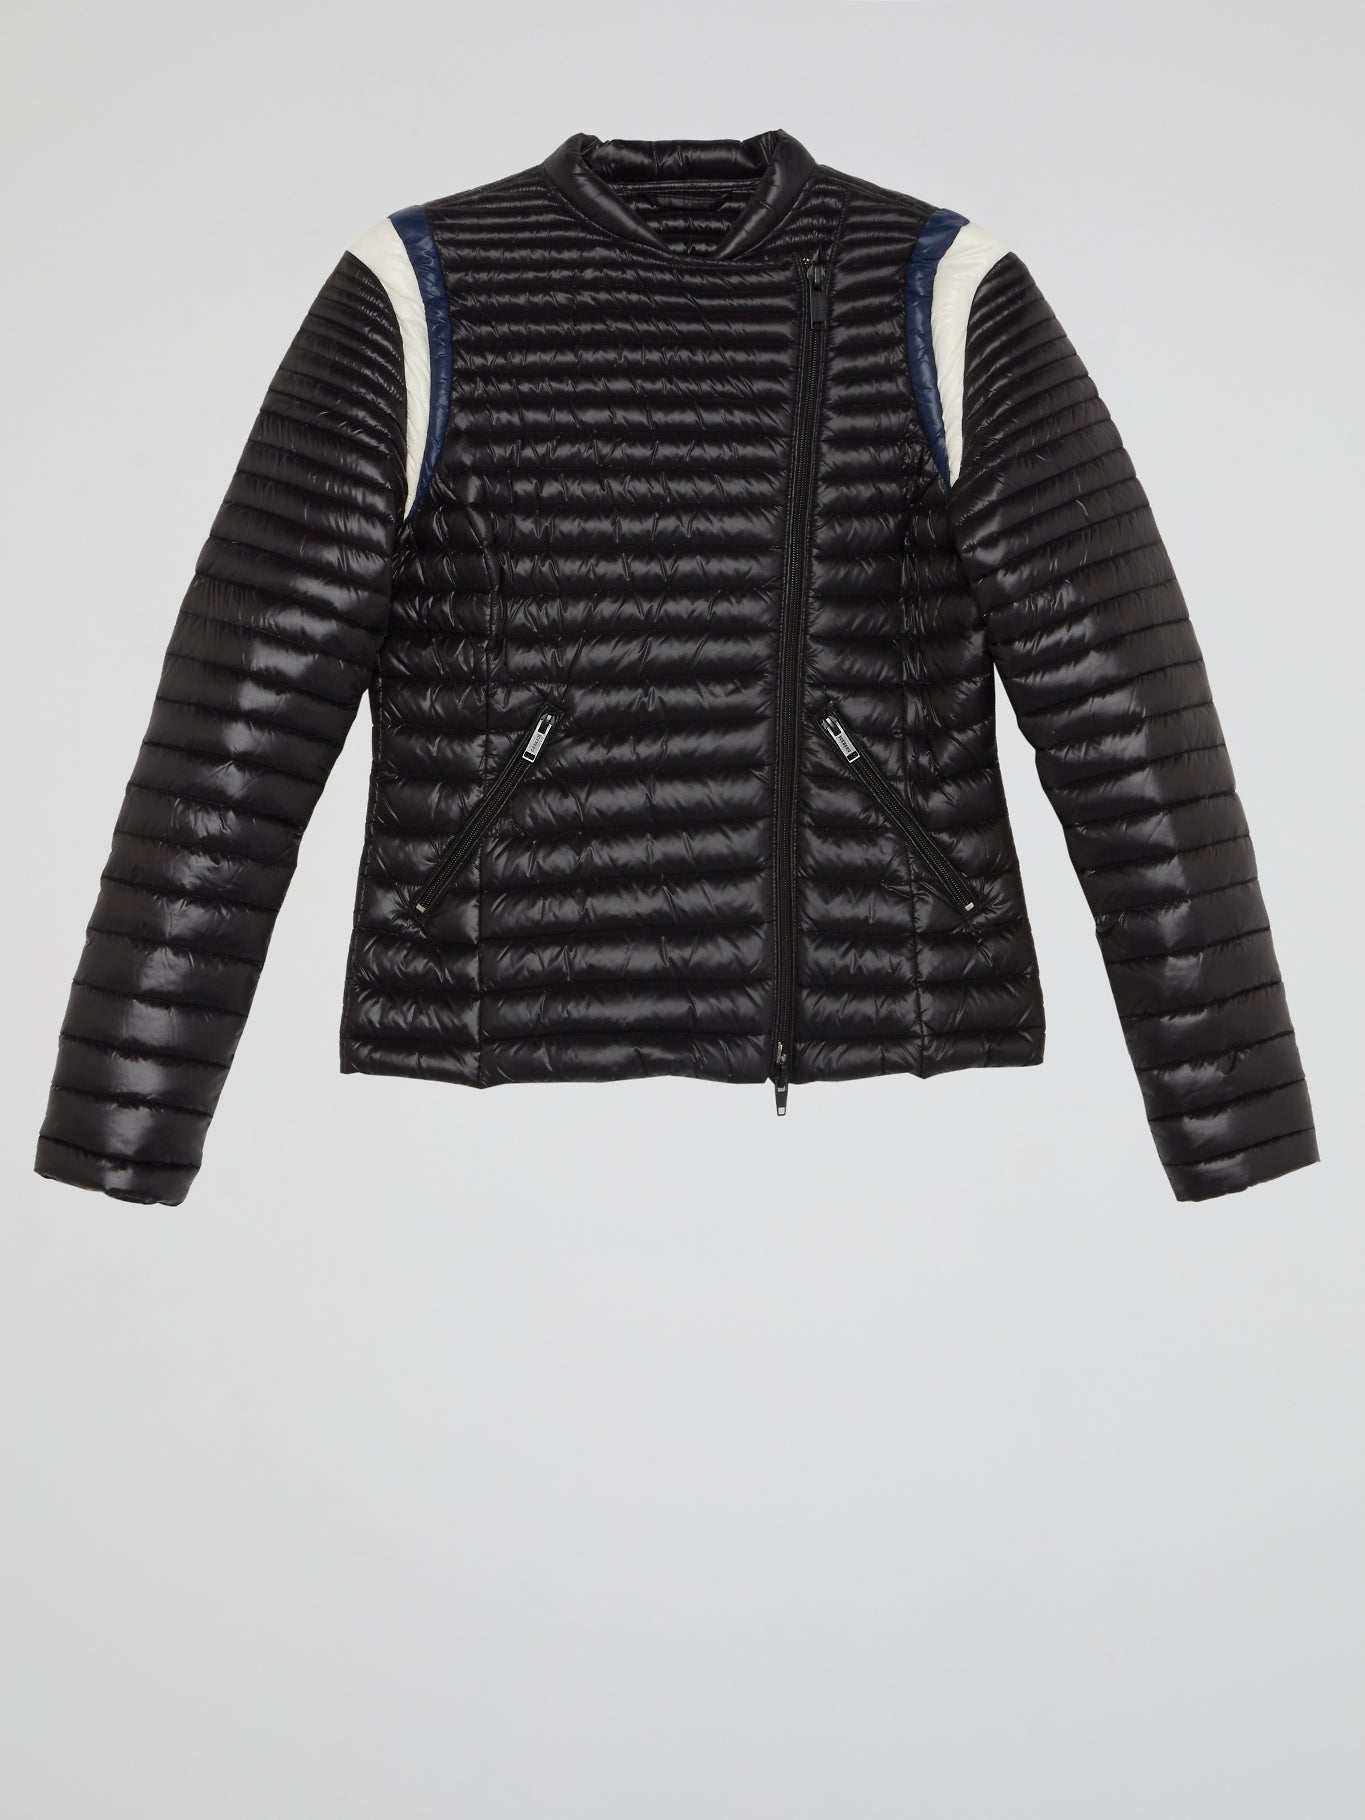 Black Quilted Jacket